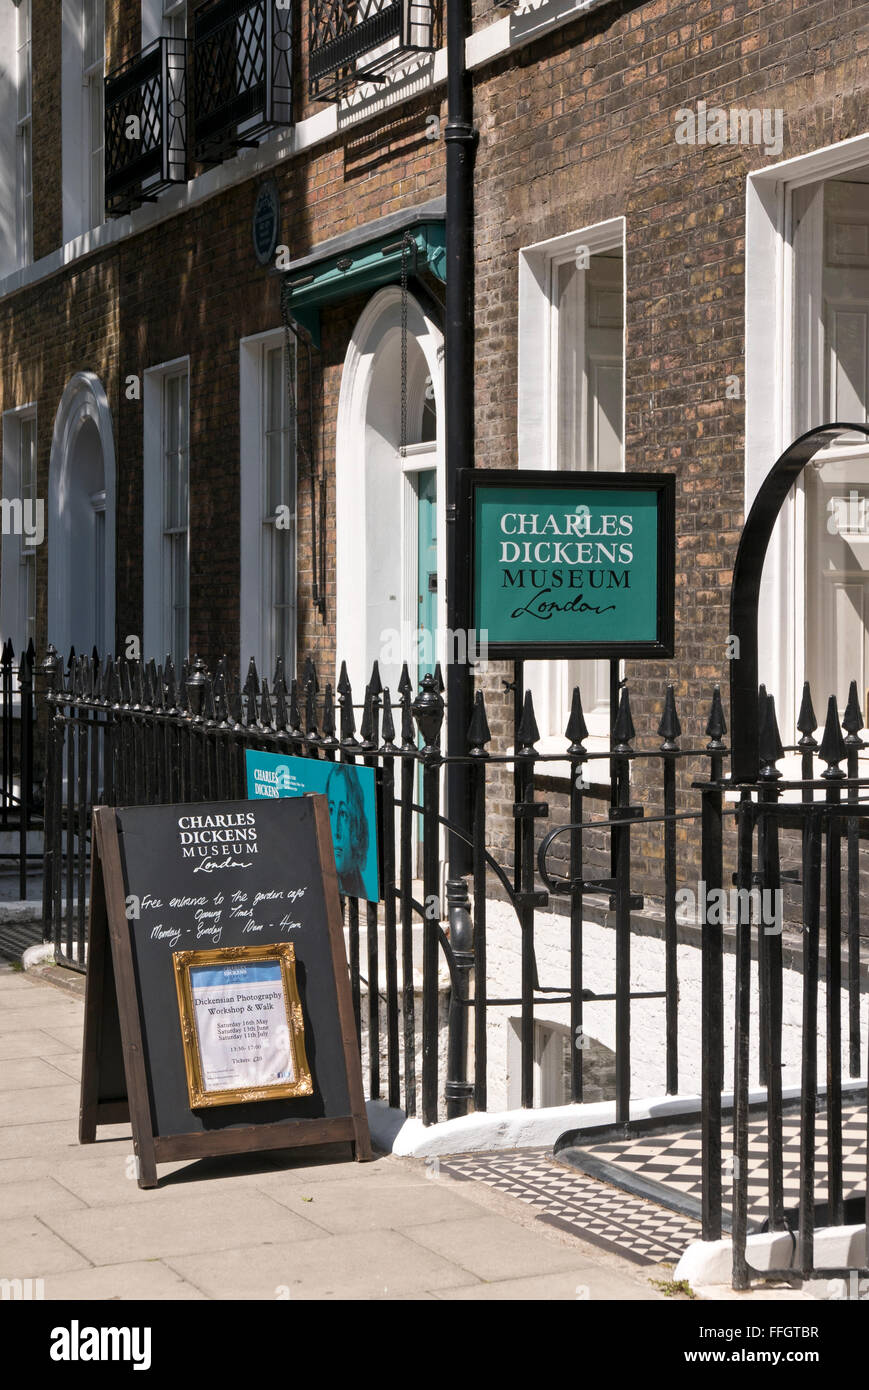 Charles Dickens Museum In London, United Kingdom. Stock Photo